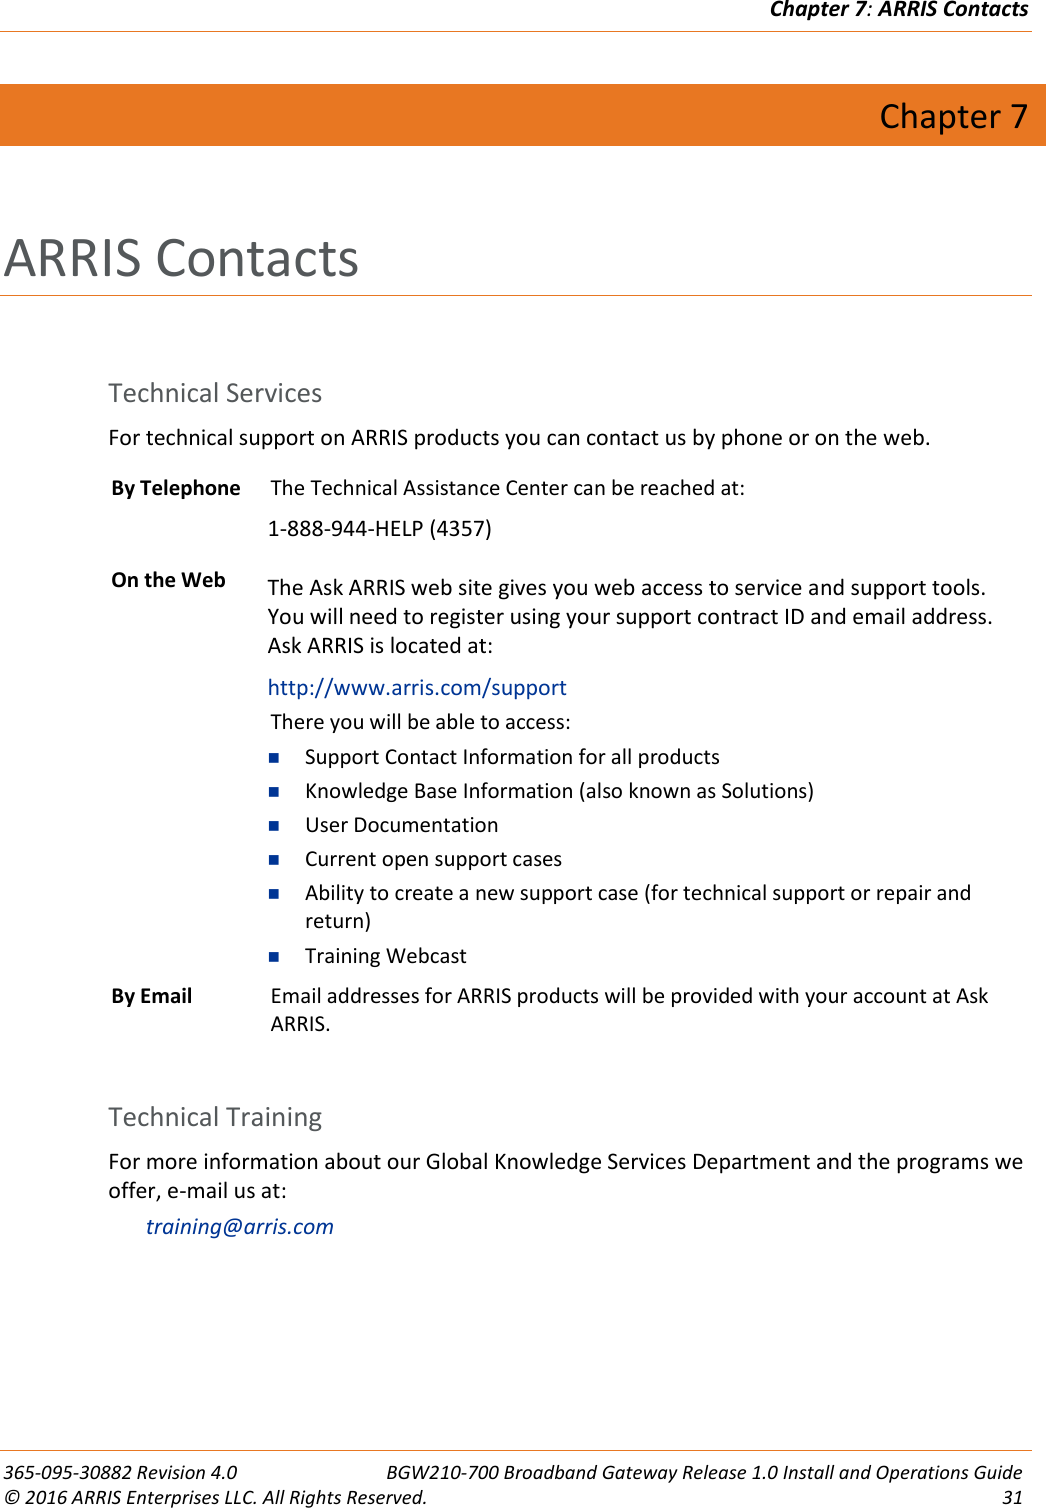 Chapter 7: ARRIS Contacts  365-095-30882 Revision 4.0  BGW210-700 Broadband Gateway Release 1.0 Install and Operations Guide © 2016 ARRIS Enterprises LLC. All Rights Reserved.  31  Chapter 7 ARRIS Contacts  Technical Services For technical support on ARRIS products you can contact us by phone or on the web.  By Telephone The Technical Assistance Center can be reached at: 1-888-944-HELP (4357) On the Web The Ask ARRIS web site gives you web access to service and support tools. You will need to register using your support contract ID and email address.  Ask ARRIS is located at: http://www.arris.com/support There you will be able to access:  Support Contact Information for all products  Knowledge Base Information (also known as Solutions)  User Documentation  Current open support cases  Ability to create a new support case (for technical support or repair and return)  Training Webcast By Email Email addresses for ARRIS products will be provided with your account at Ask ARRIS.  Technical Training For more information about our Global Knowledge Services Department and the programs we offer, e-mail us at: training@arris.com  